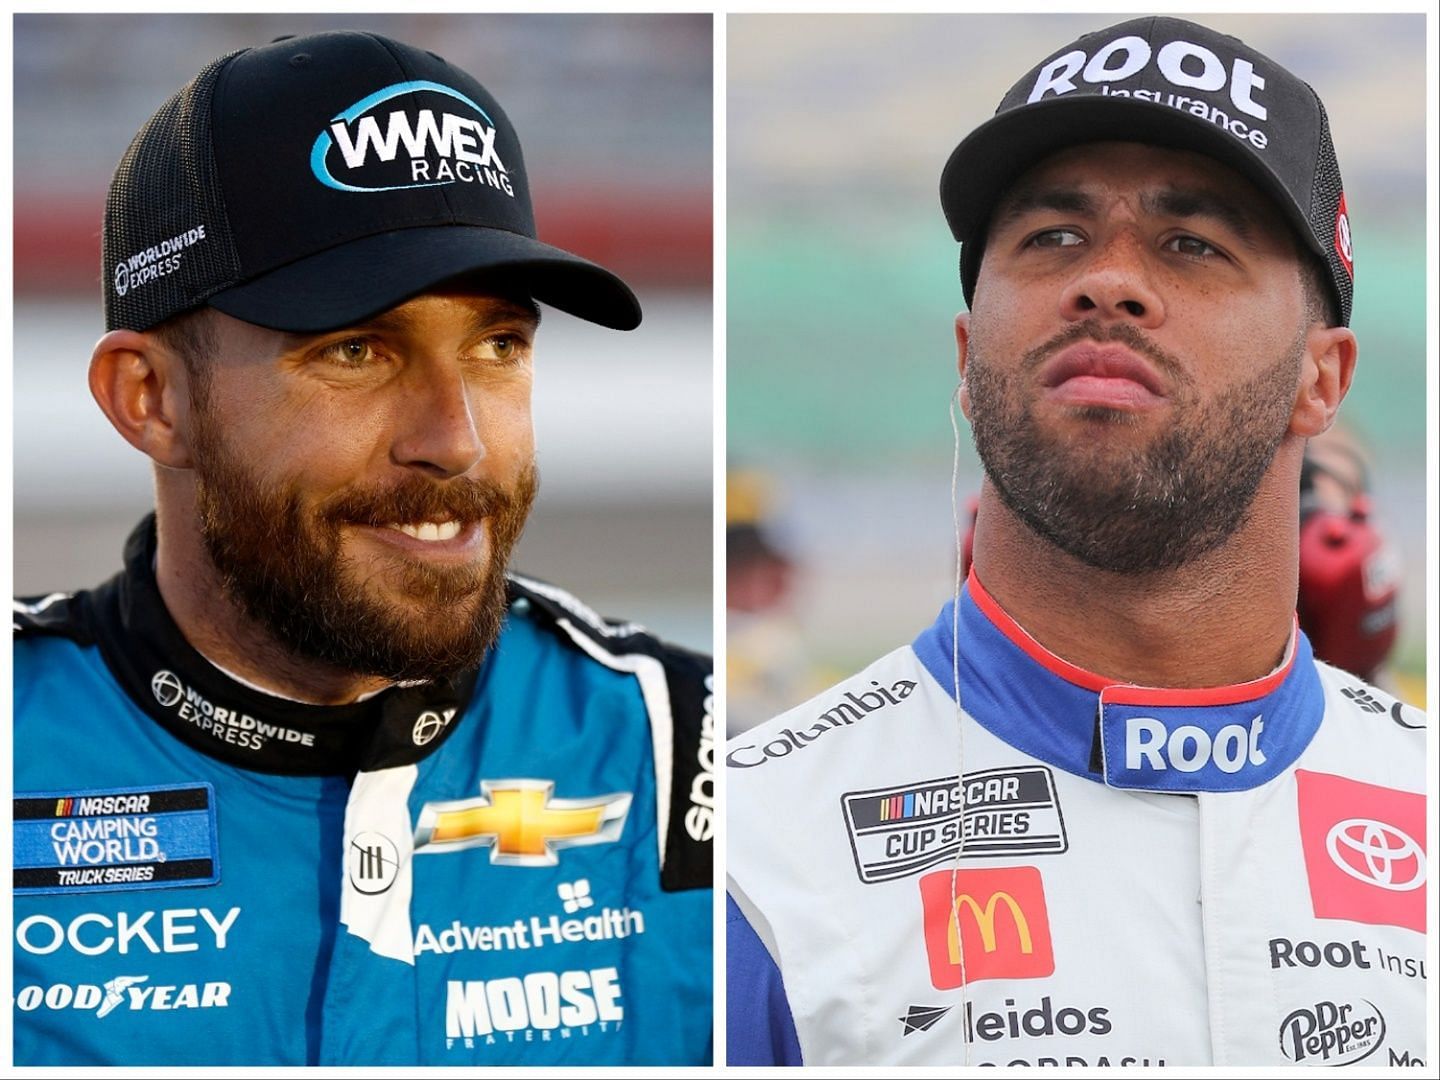 Ross Chastain and Bubba Wallace